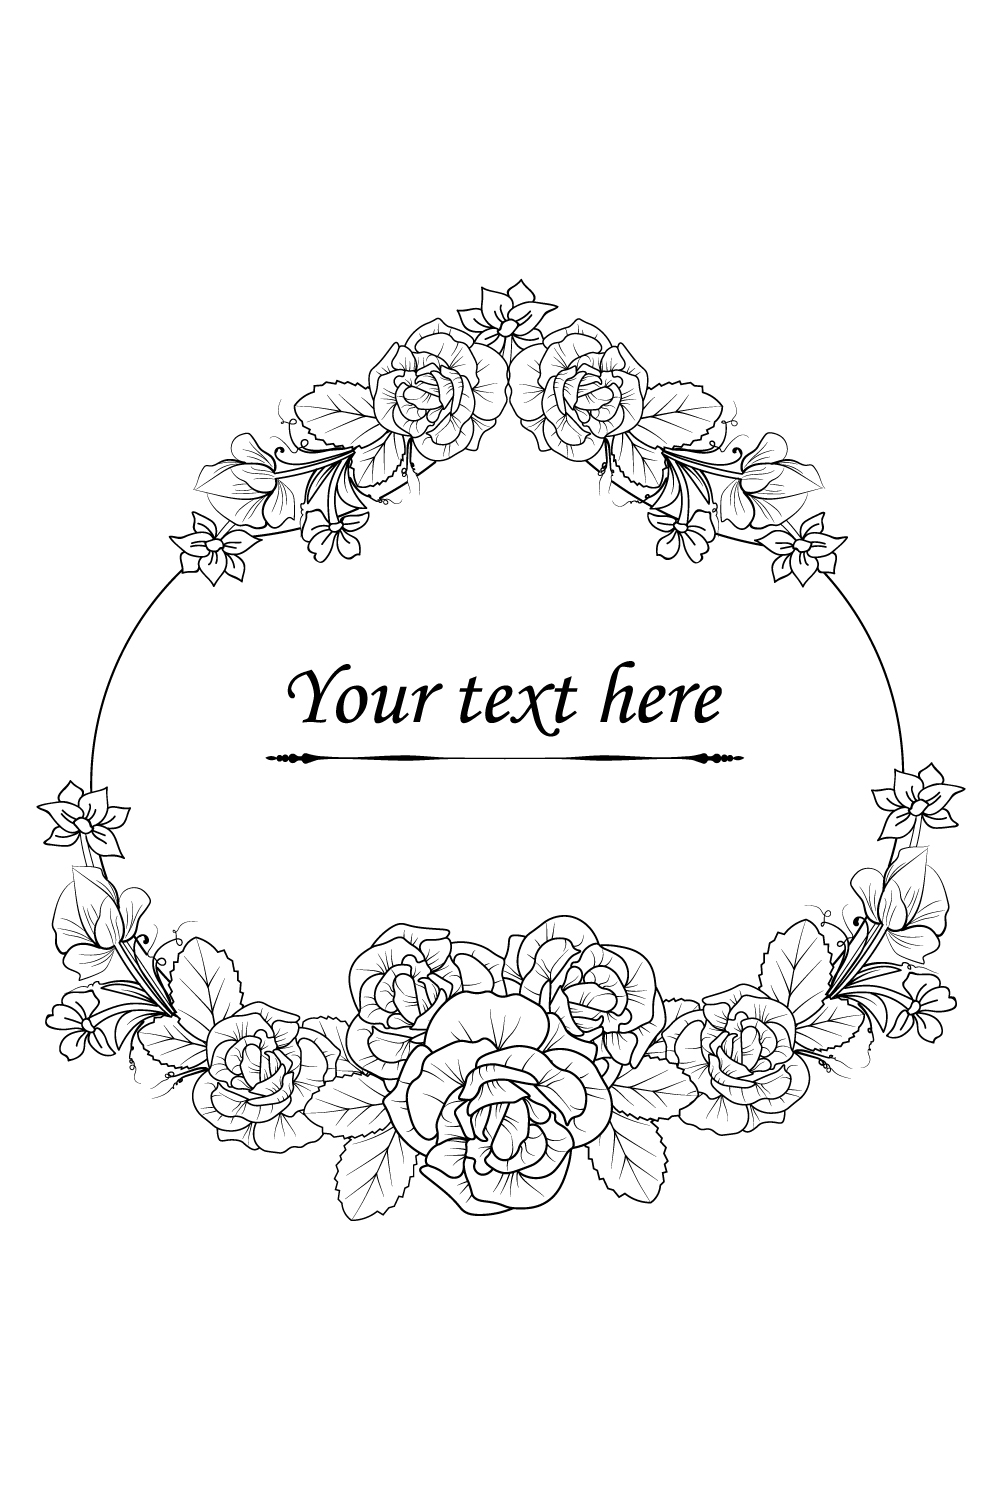 Tattoo Sketch Rose Vector Images (over 6,700)